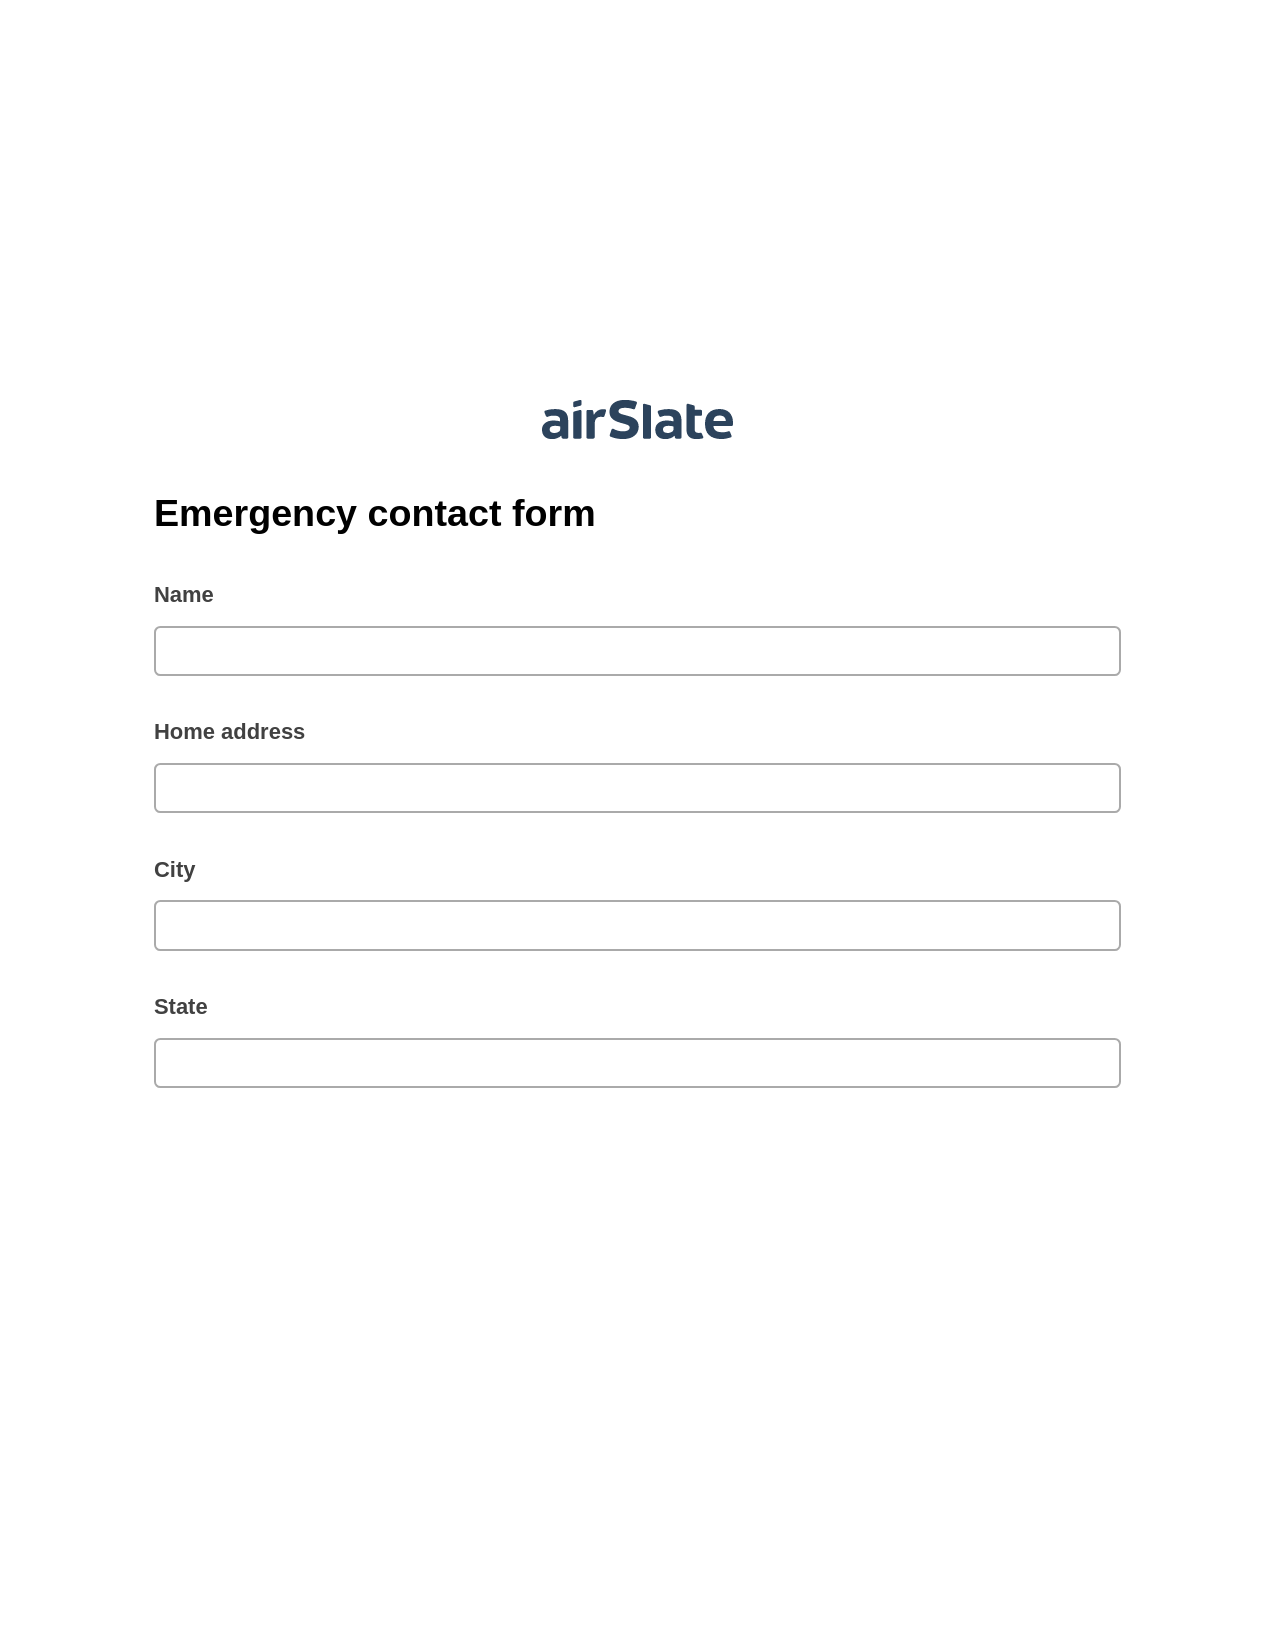 Multirole Emergency contact form Pre-fill Slate from MS Dynamics 365 Records Bot, Mailchimp send Campaign bot, Export to MySQL Bot